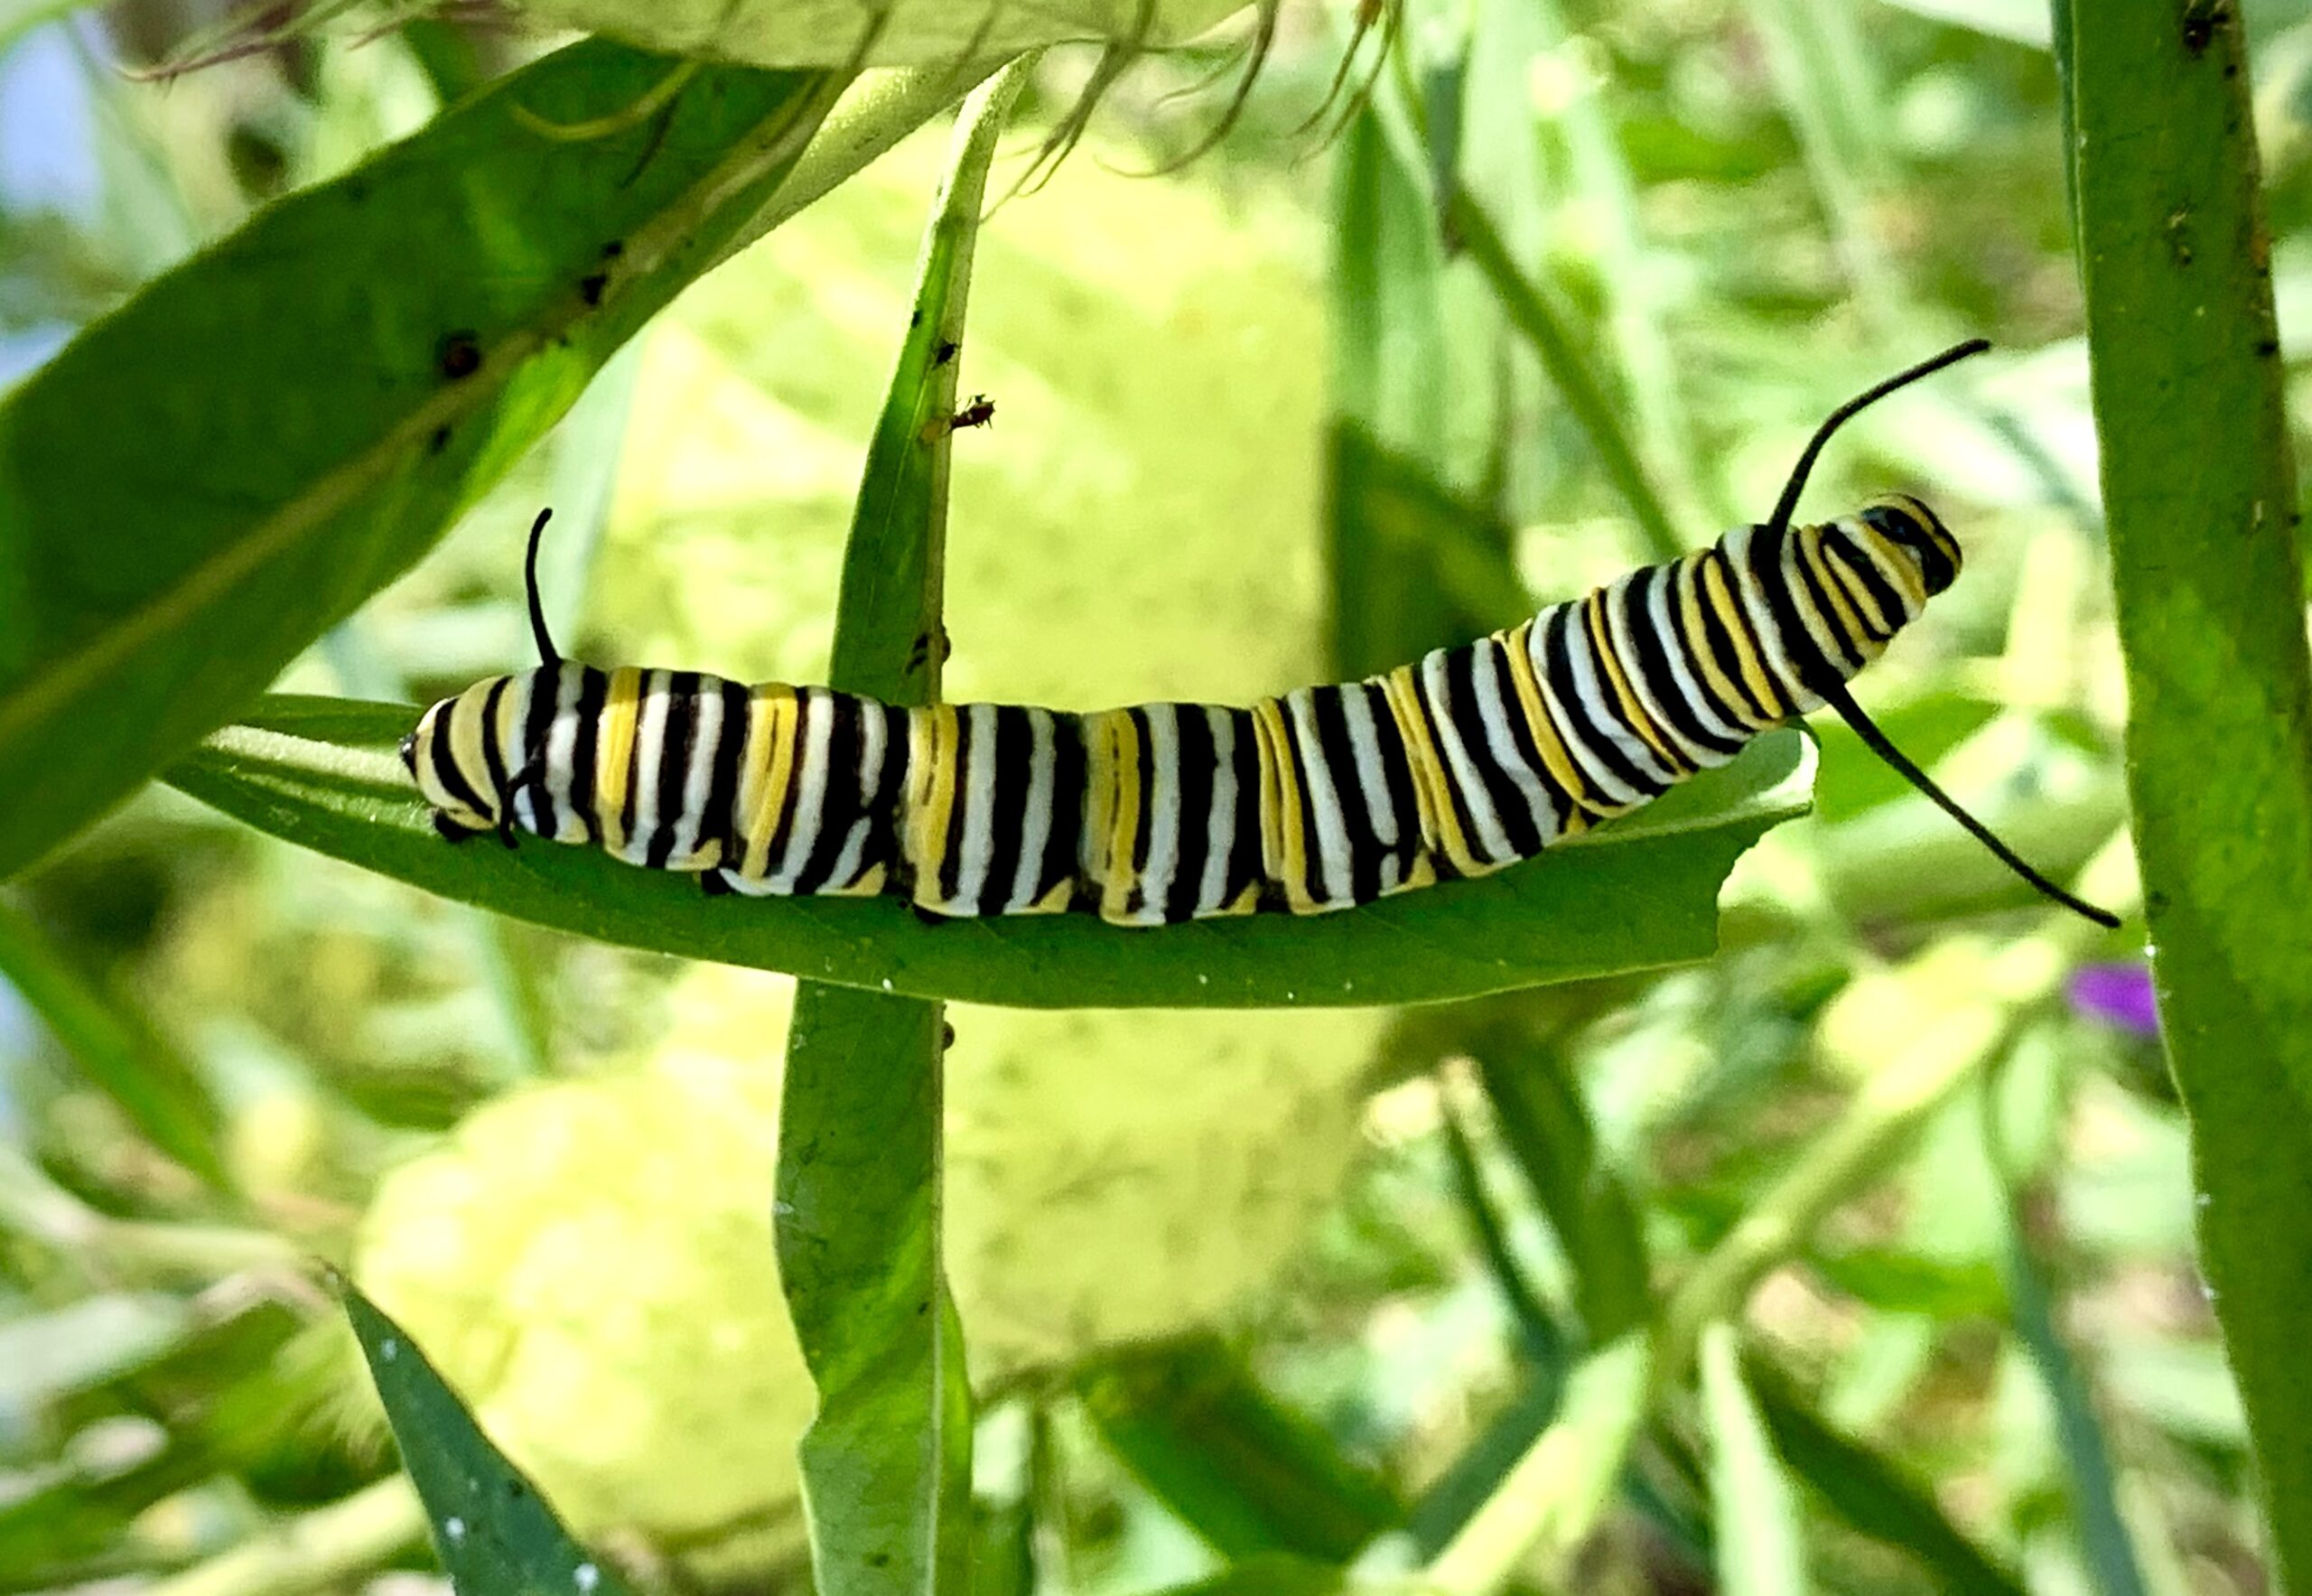 Monarch caterpillar feeding on milkweed plant. Milkweed is a host plant for multiple native butterflies to the United States and also supplies nectar to adults.